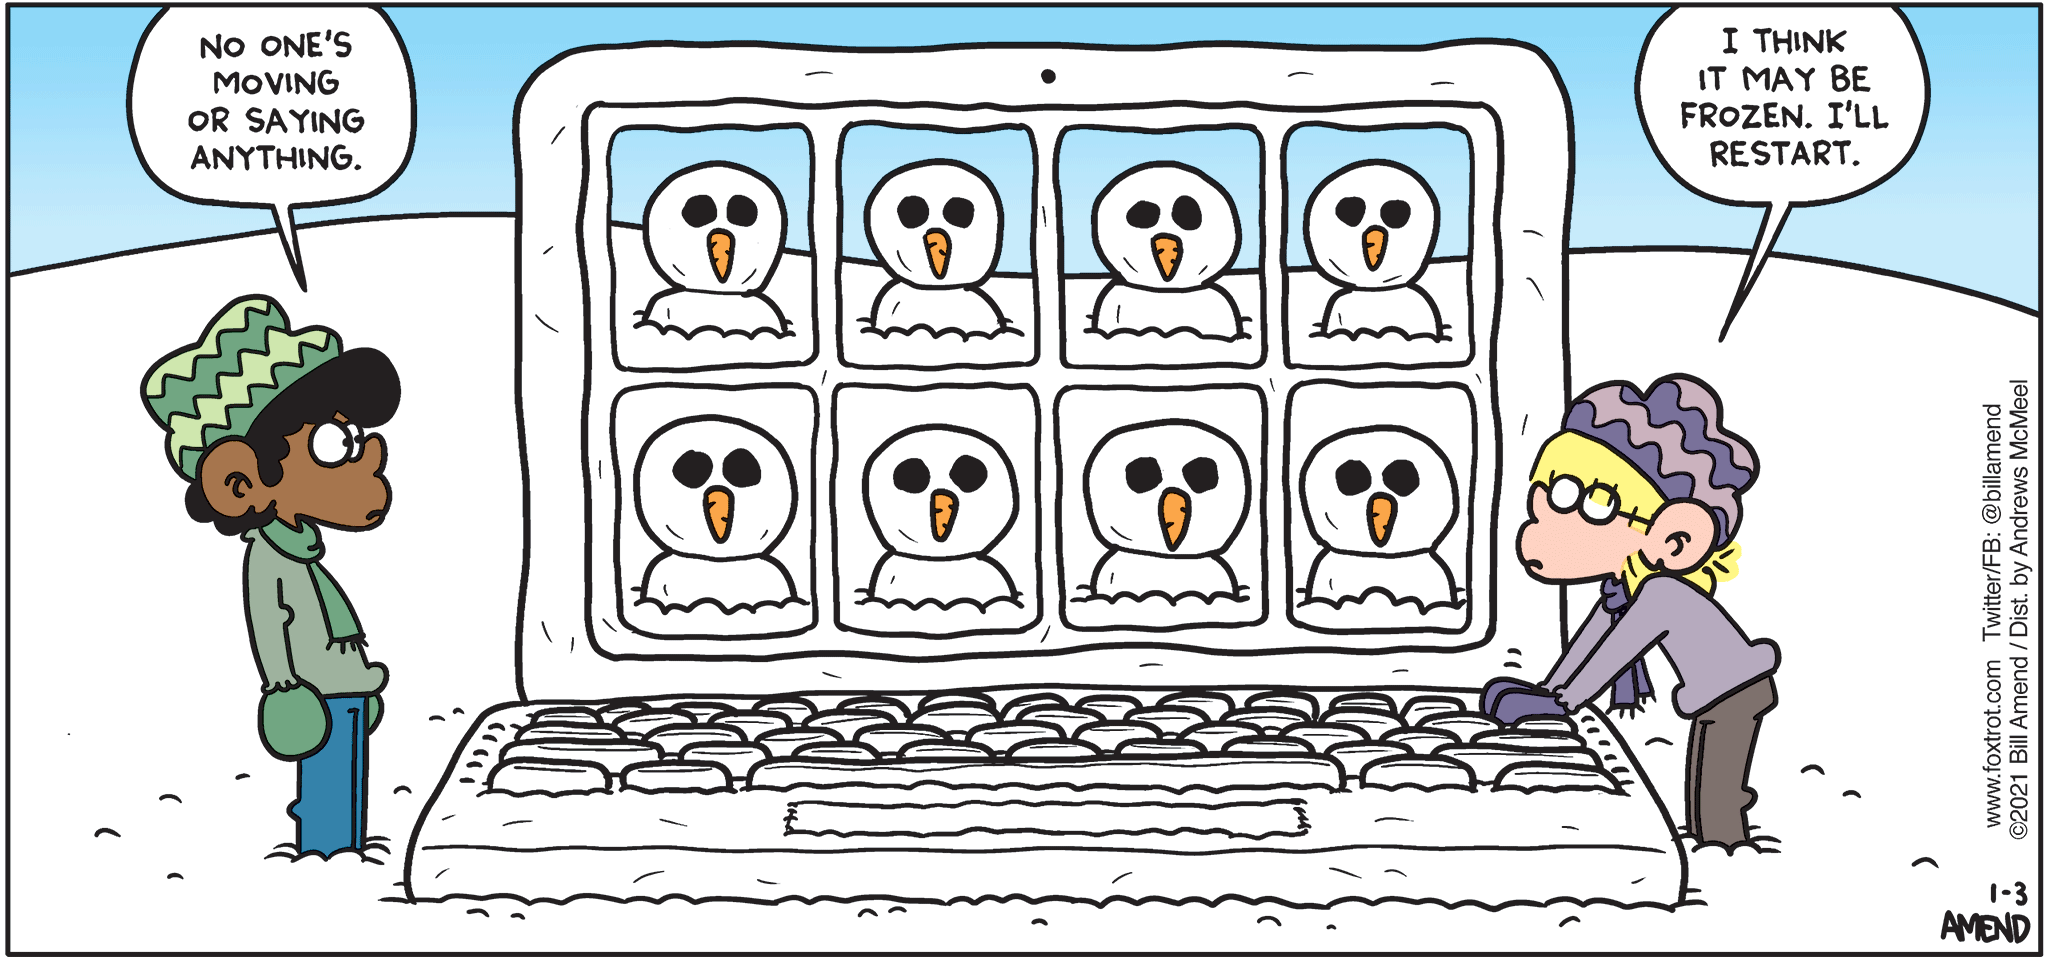 FoxTrot comic strip by Bill Amend - "Computer Issues" published January 3, 2021 - Marcus: No one's moving or saying anything. Jason: I think it may be frozen. I'll restart.